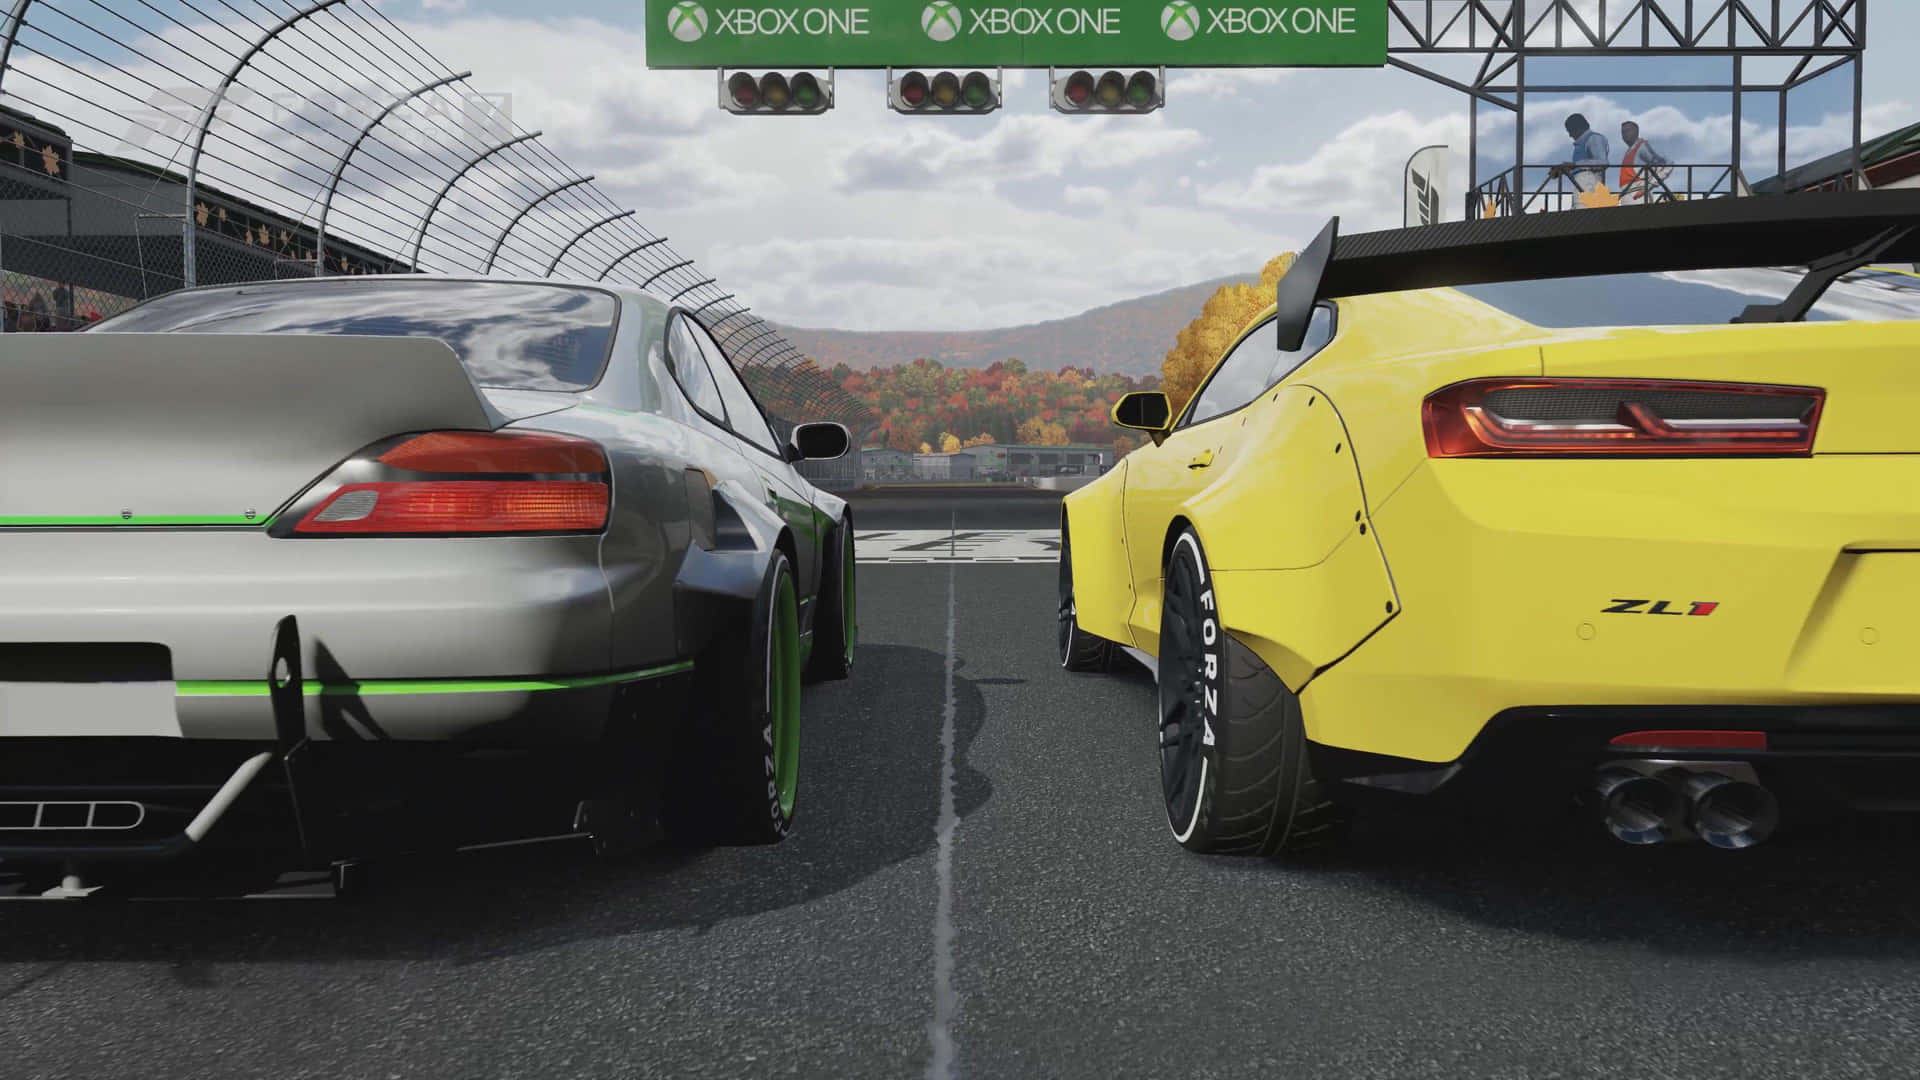 Chasing The Checkered Flag in Forza Motorsport 7